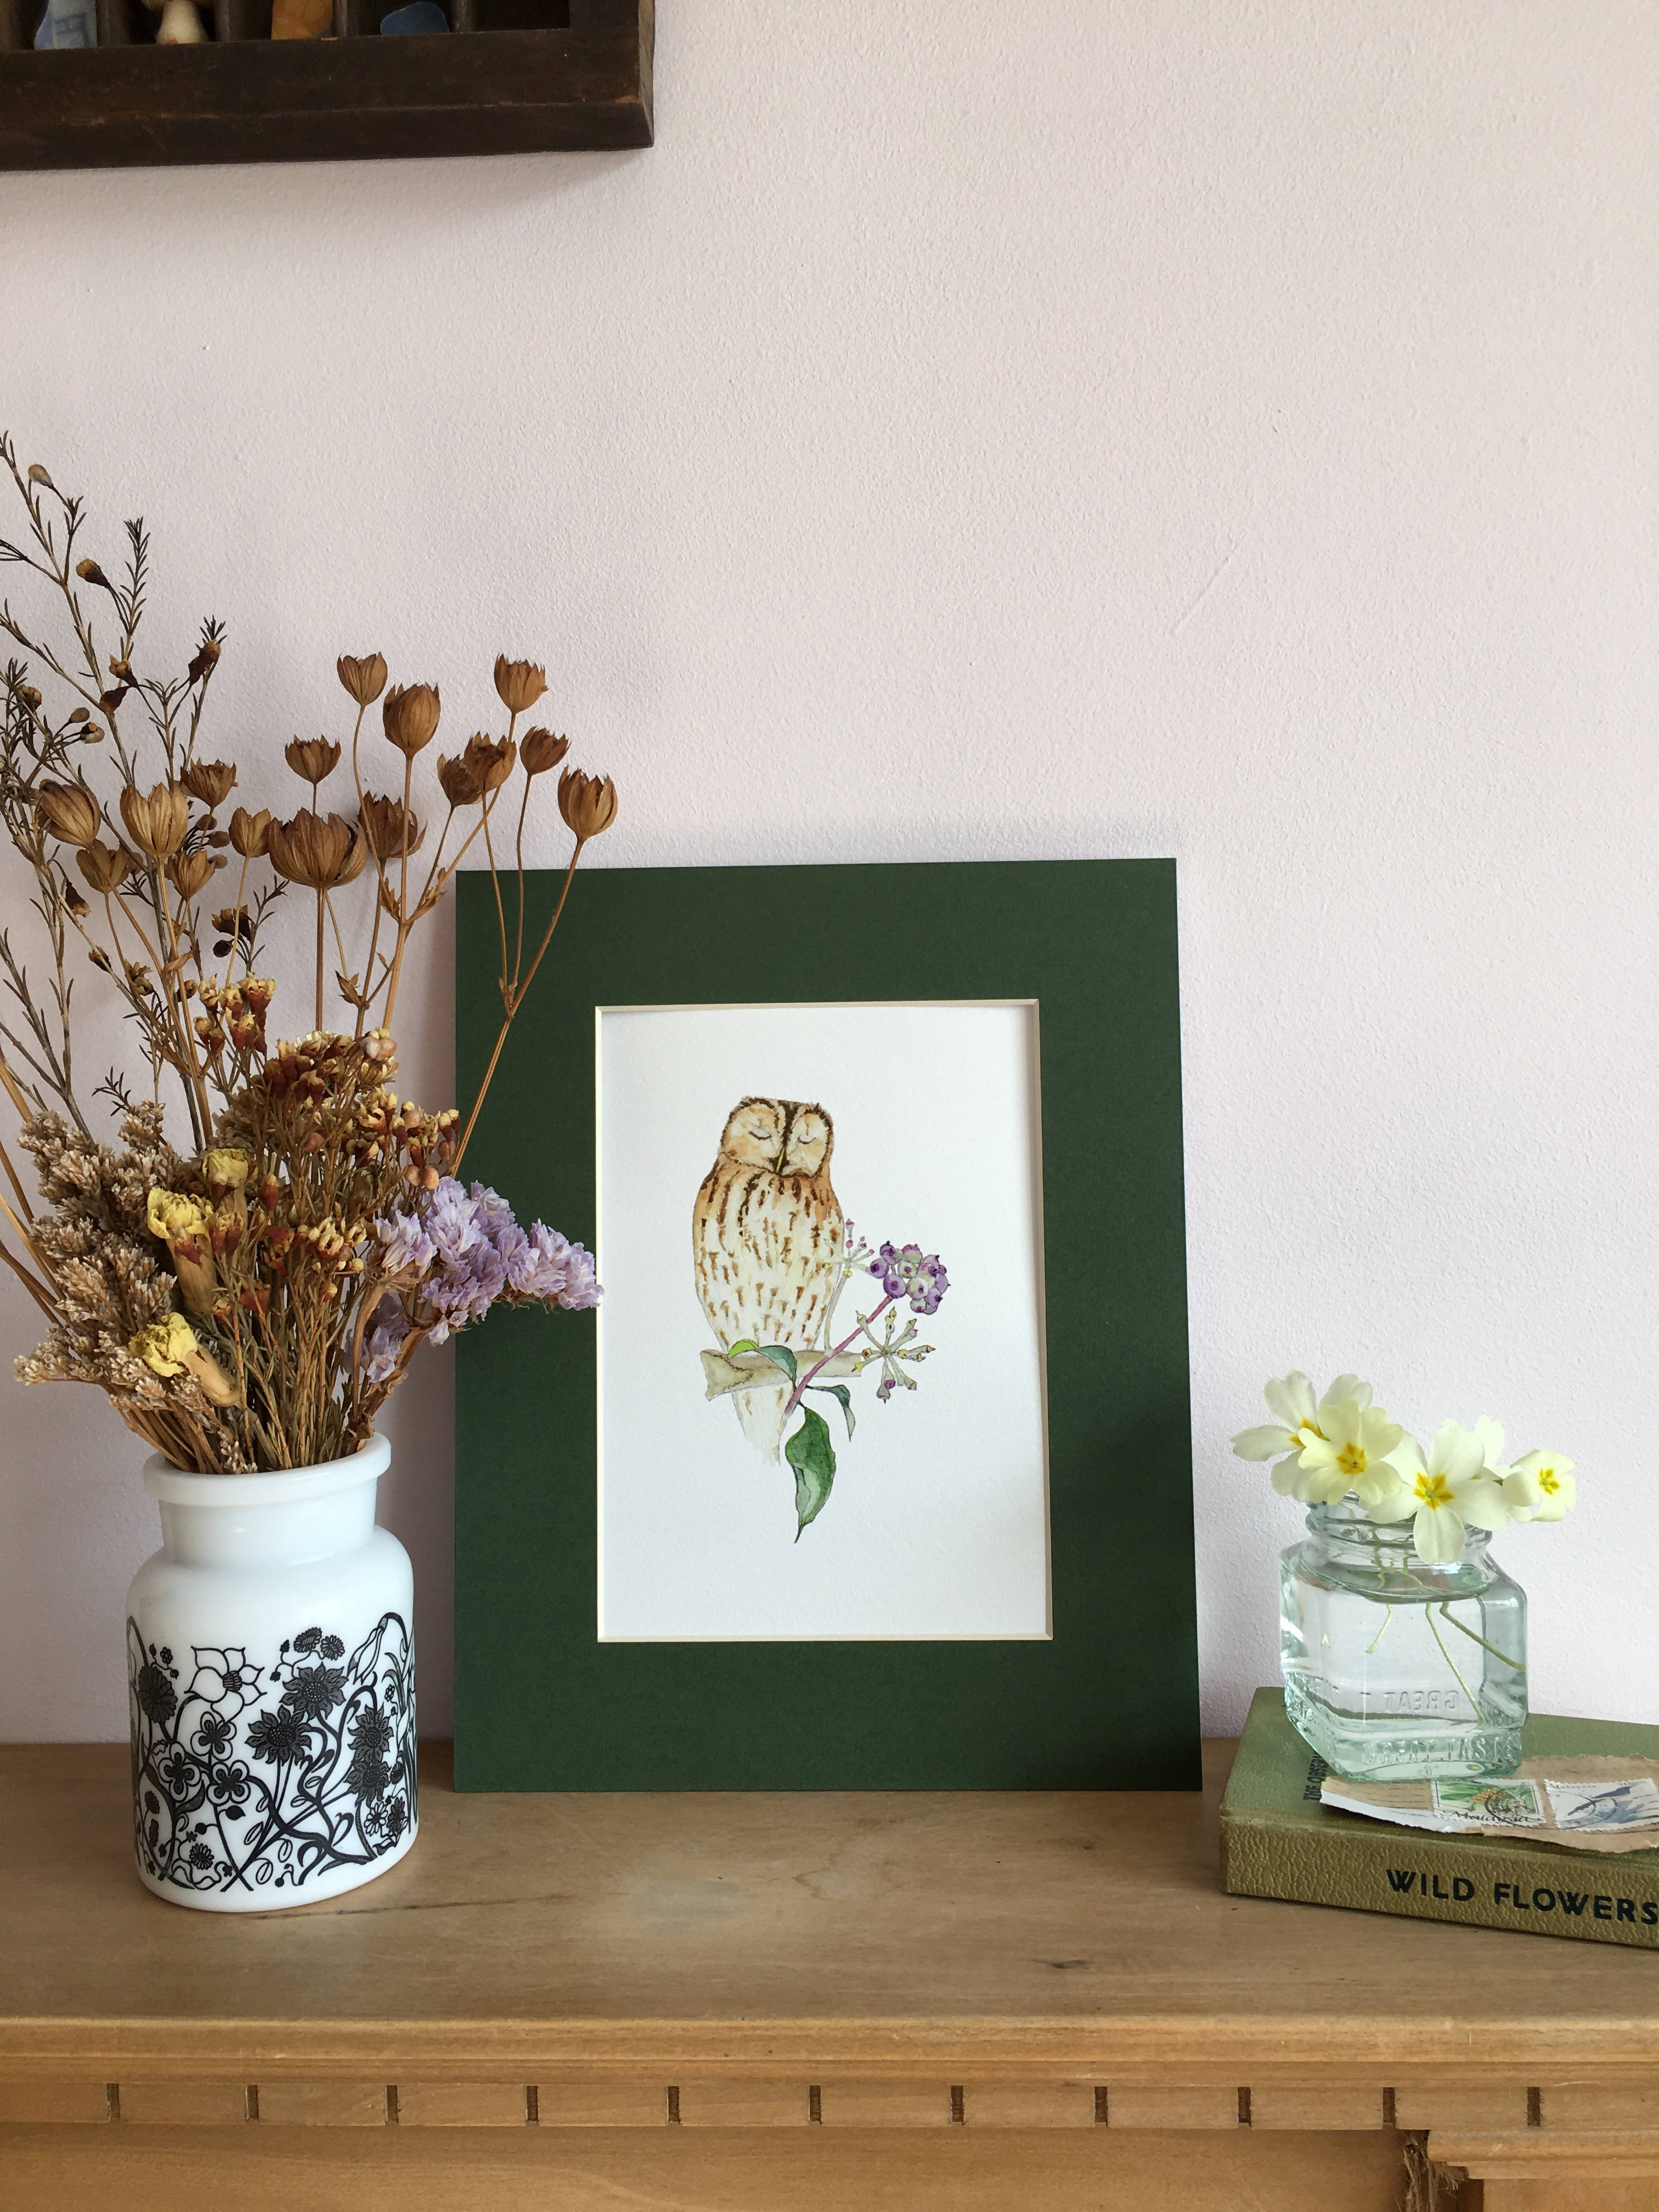 Tawny owl and ivy berries Giclee print